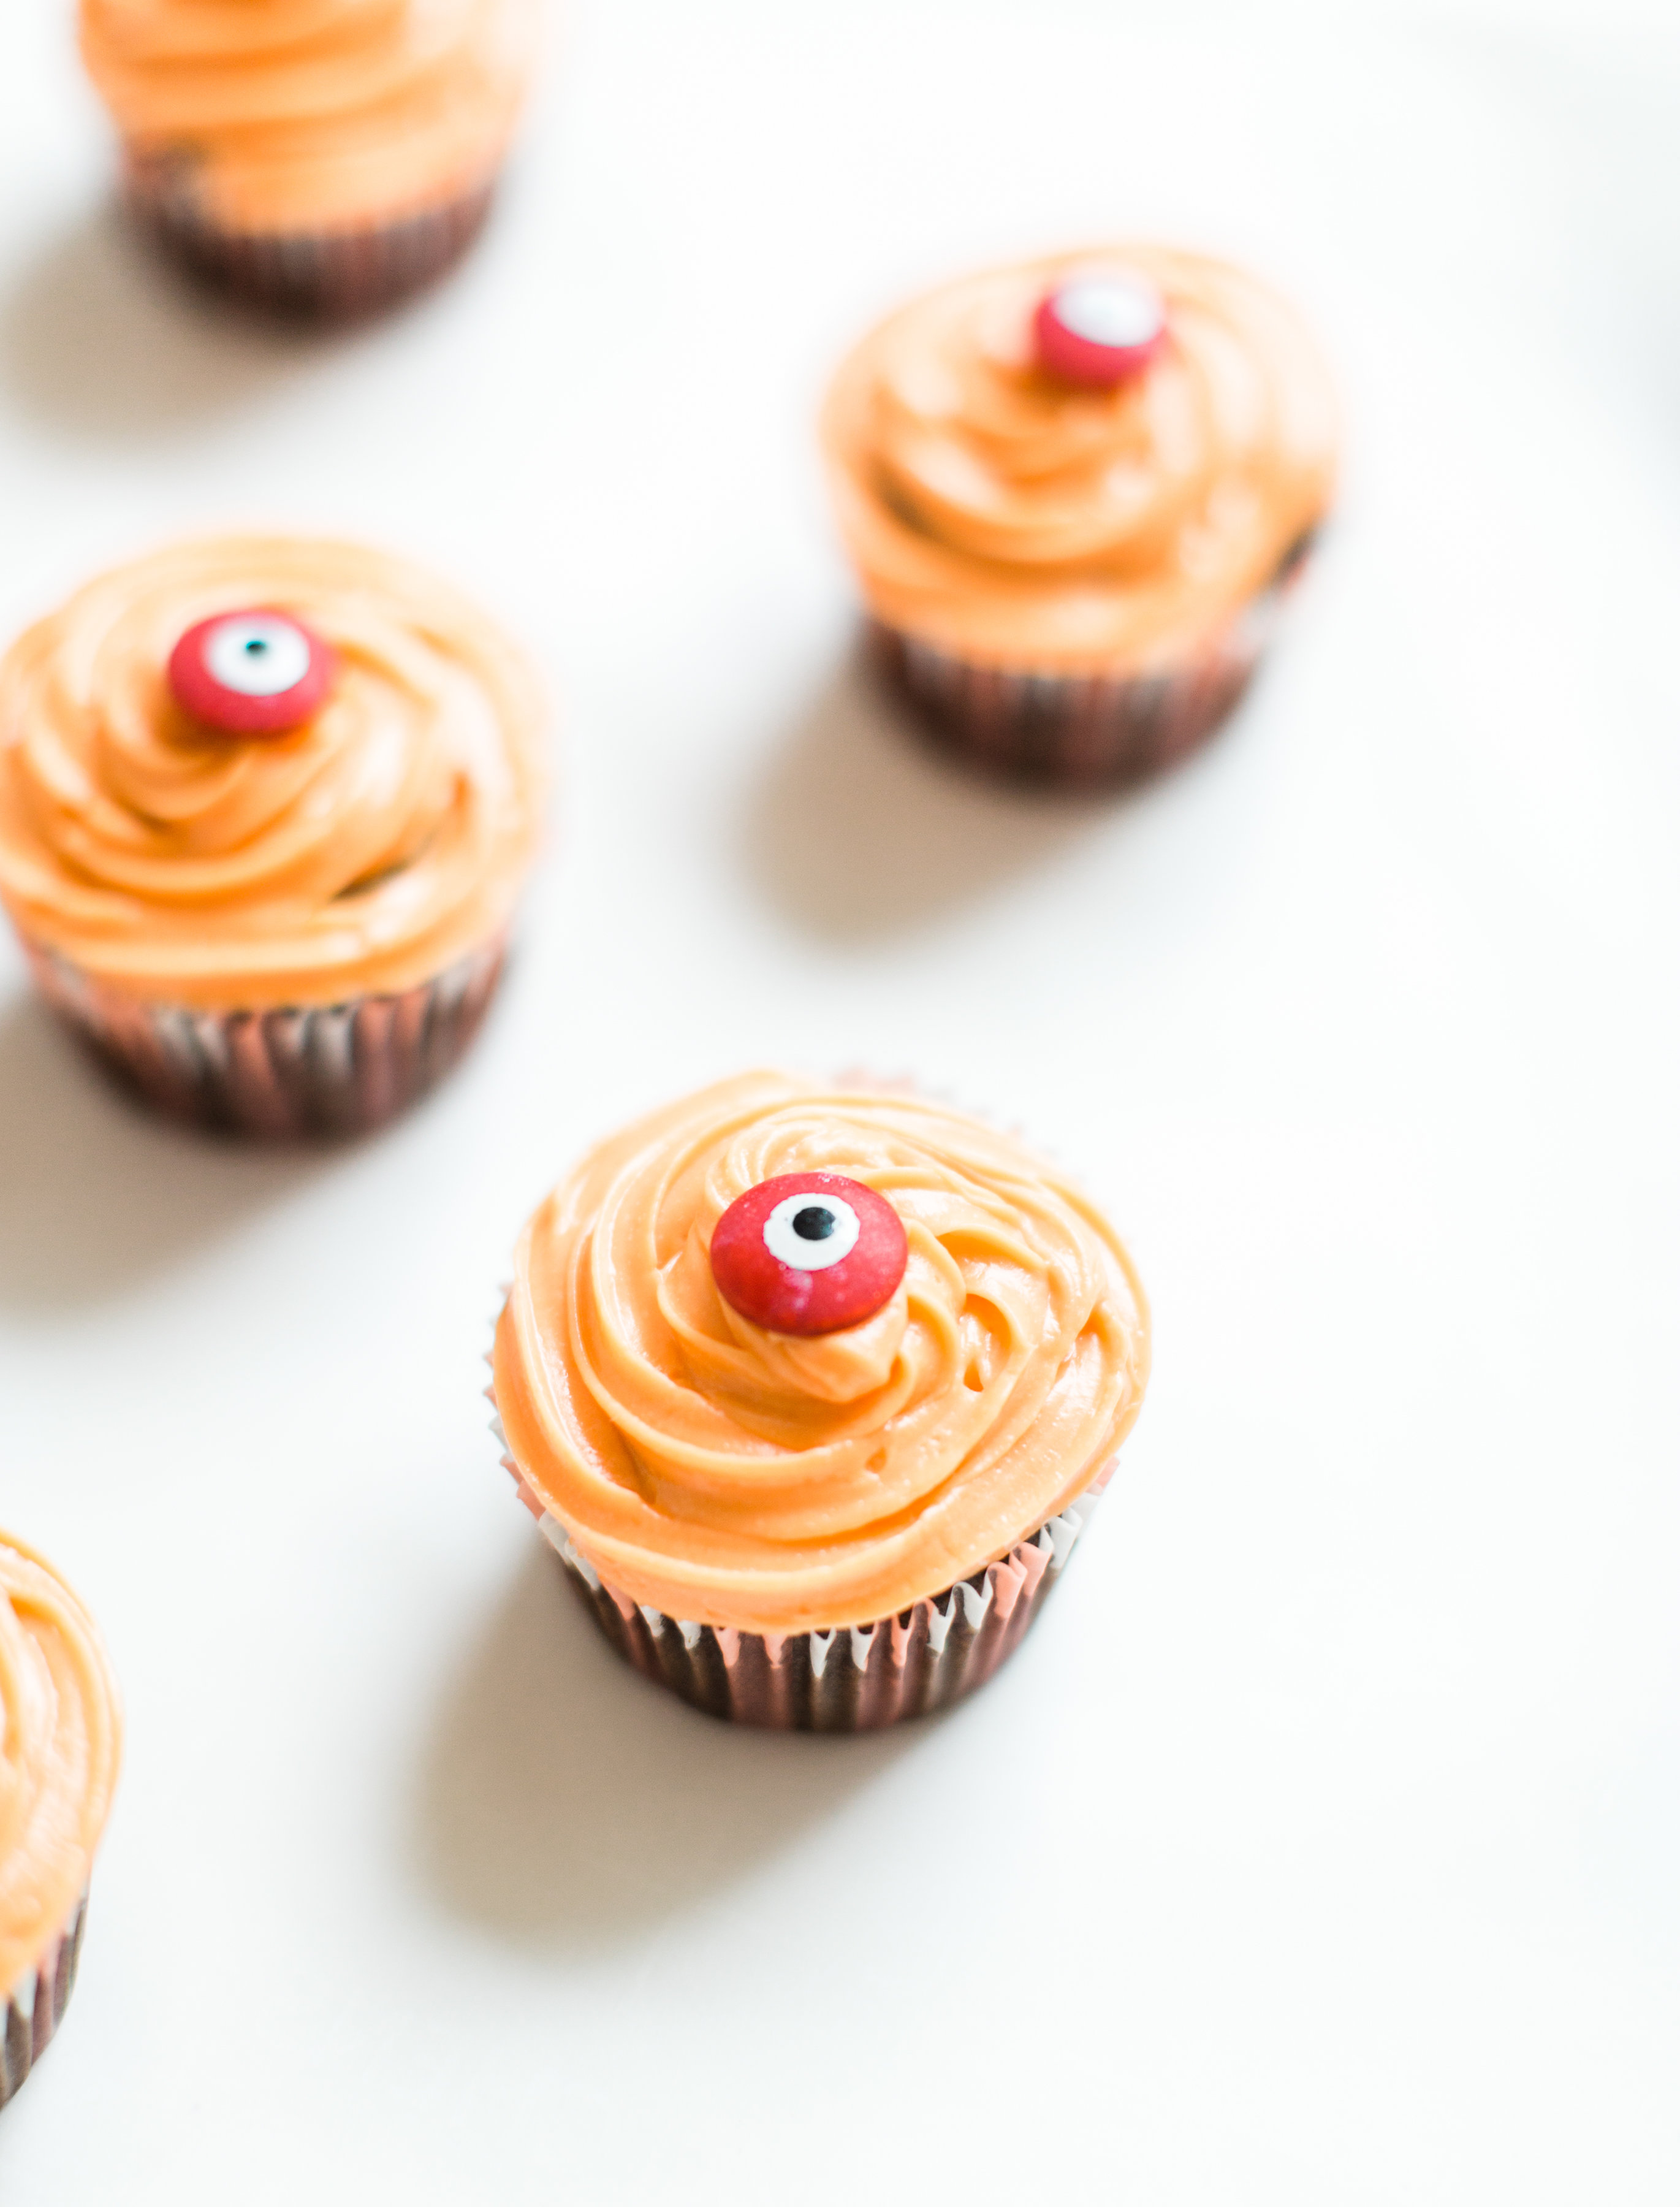 Make these absolutely adorable haunted Halloween eyeball chocolate cupcakes with our favorite easy crazy cake recipe. These easy-to-make cupcakes are perfect for your next spooky Halloween party! Click through for the #recipe. #halloween #halloweencupcakes #crazycake #crazycakecupcakes #halloweendessert #halloweendiy #diy #eyeballcupcakes #spookycupcakes #halloweencake | glitterinc.com | @glitterinc